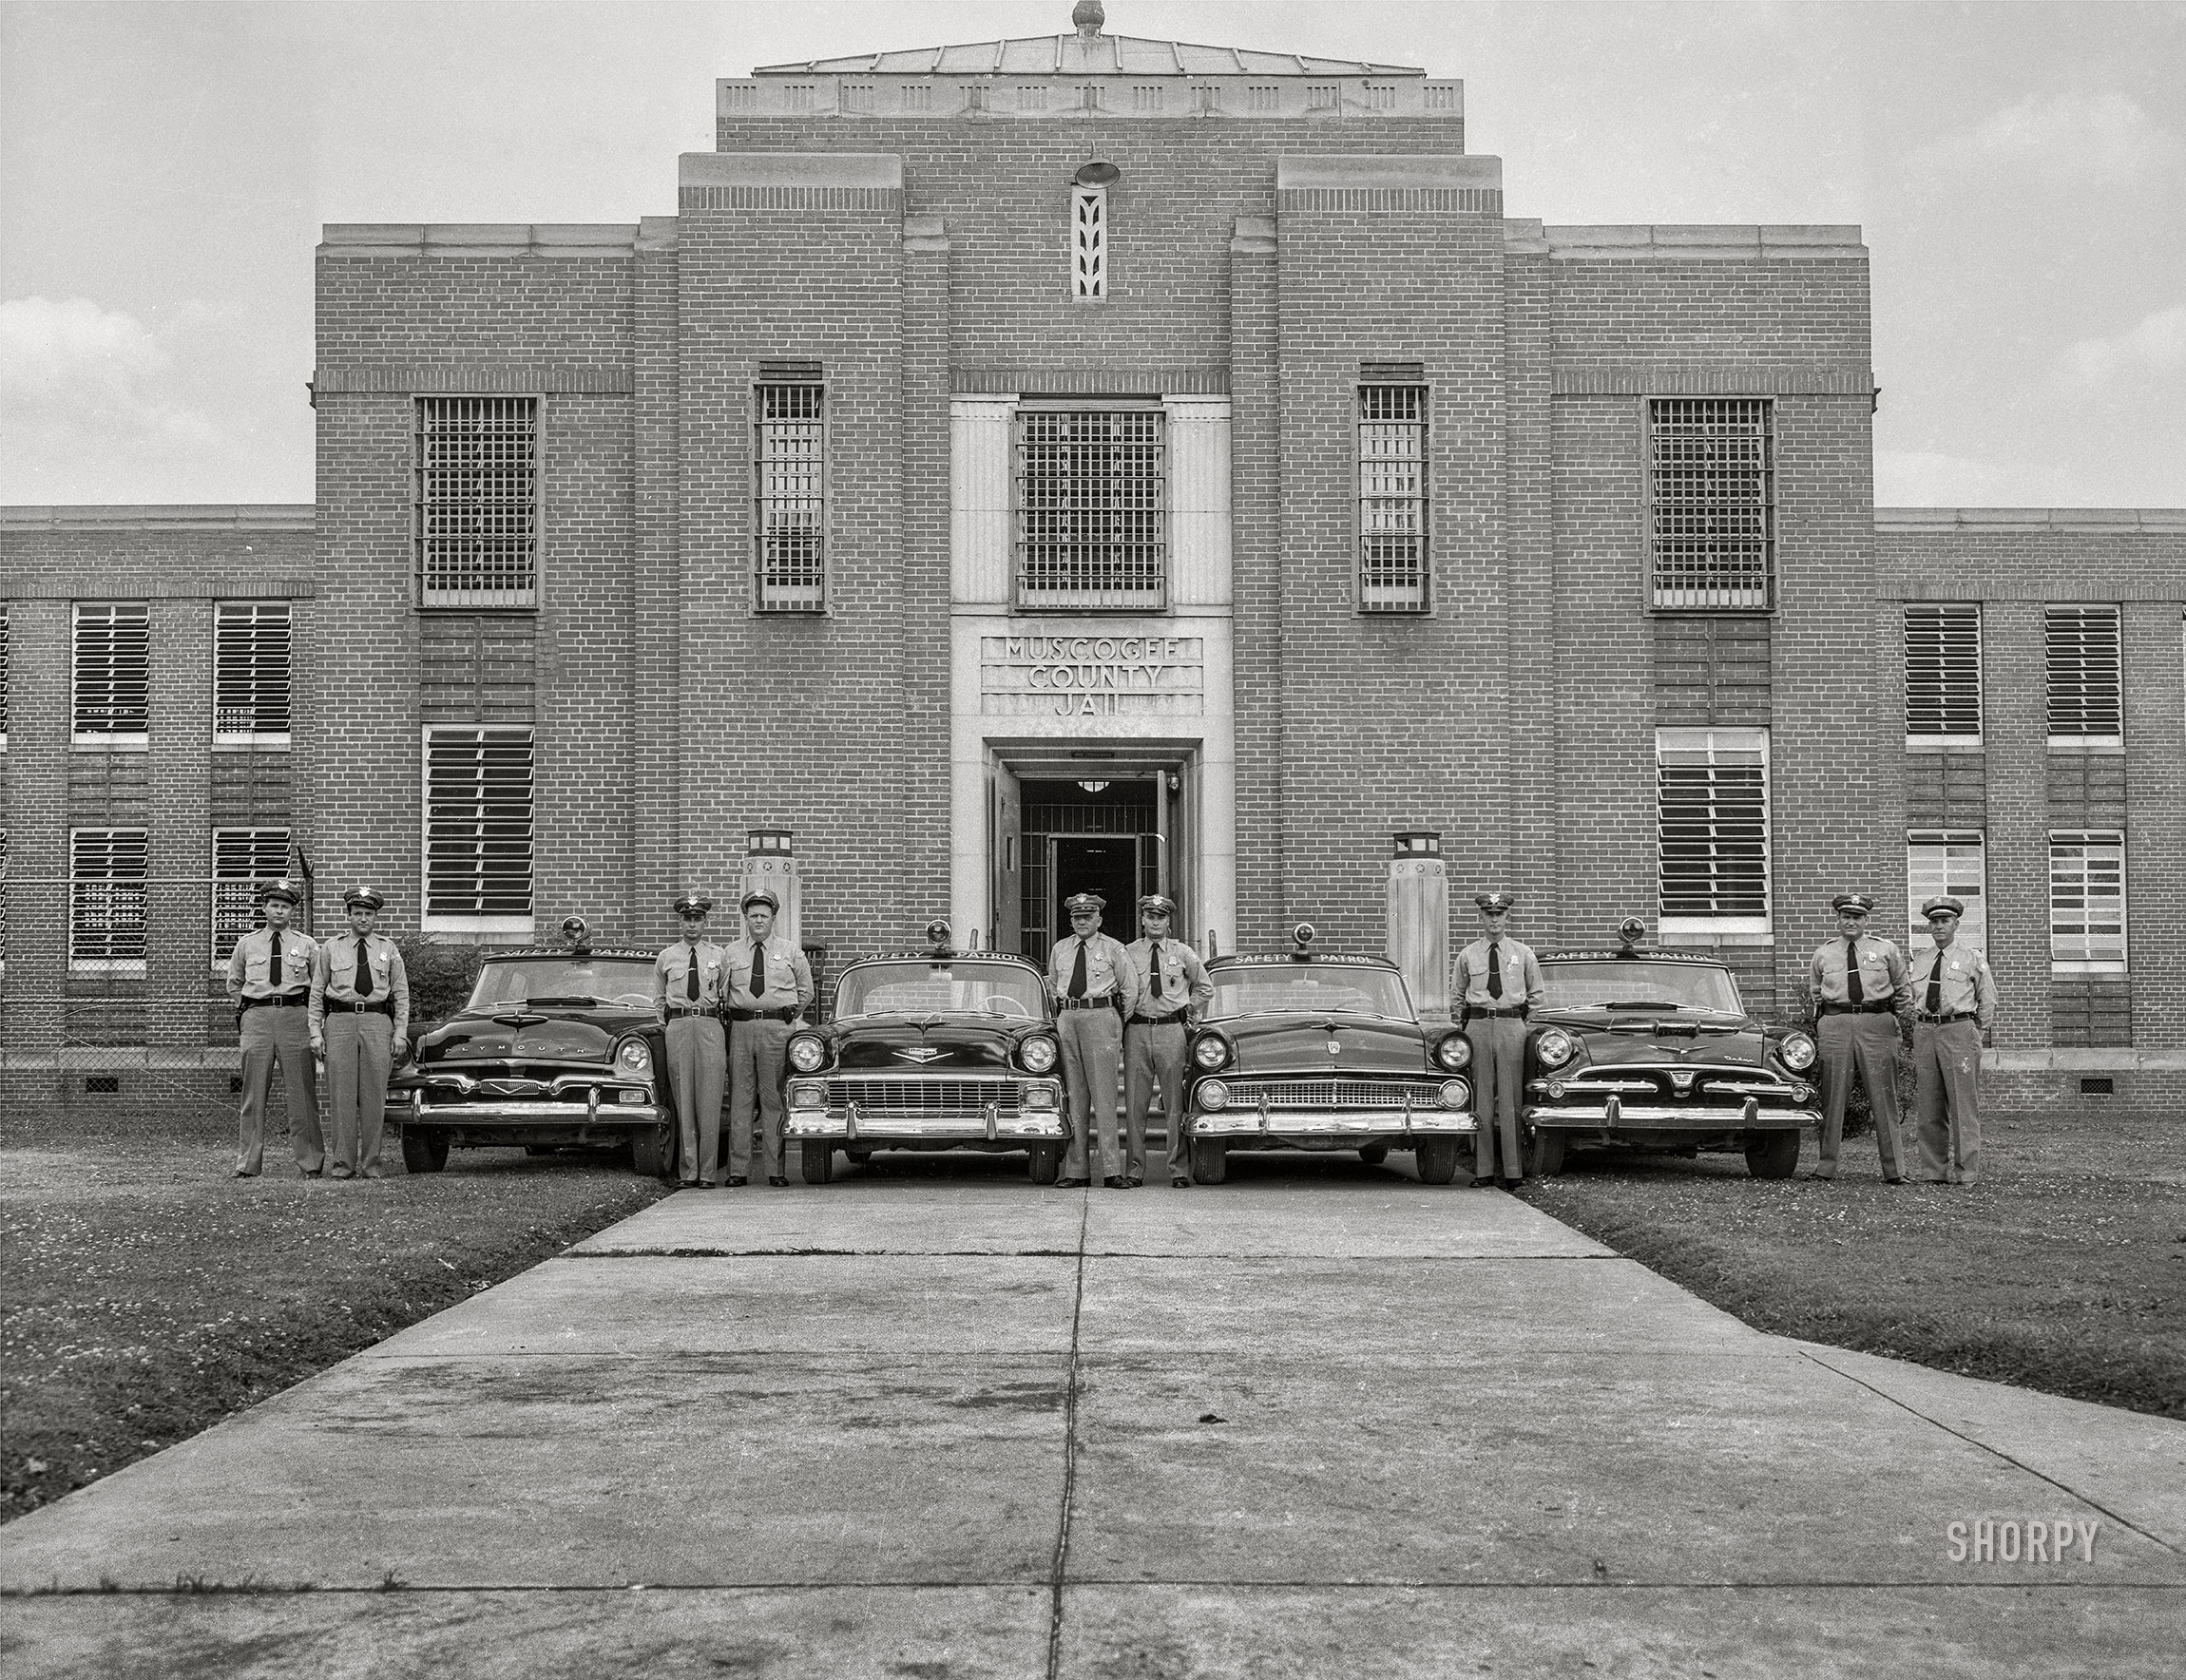 Columbus, Georgia, circa 1956. "Police cars at Muscogee County Jail." Let's be careful out there! 4x5 inch acetate negative from the Shorpy News Photo Archive. View full size.